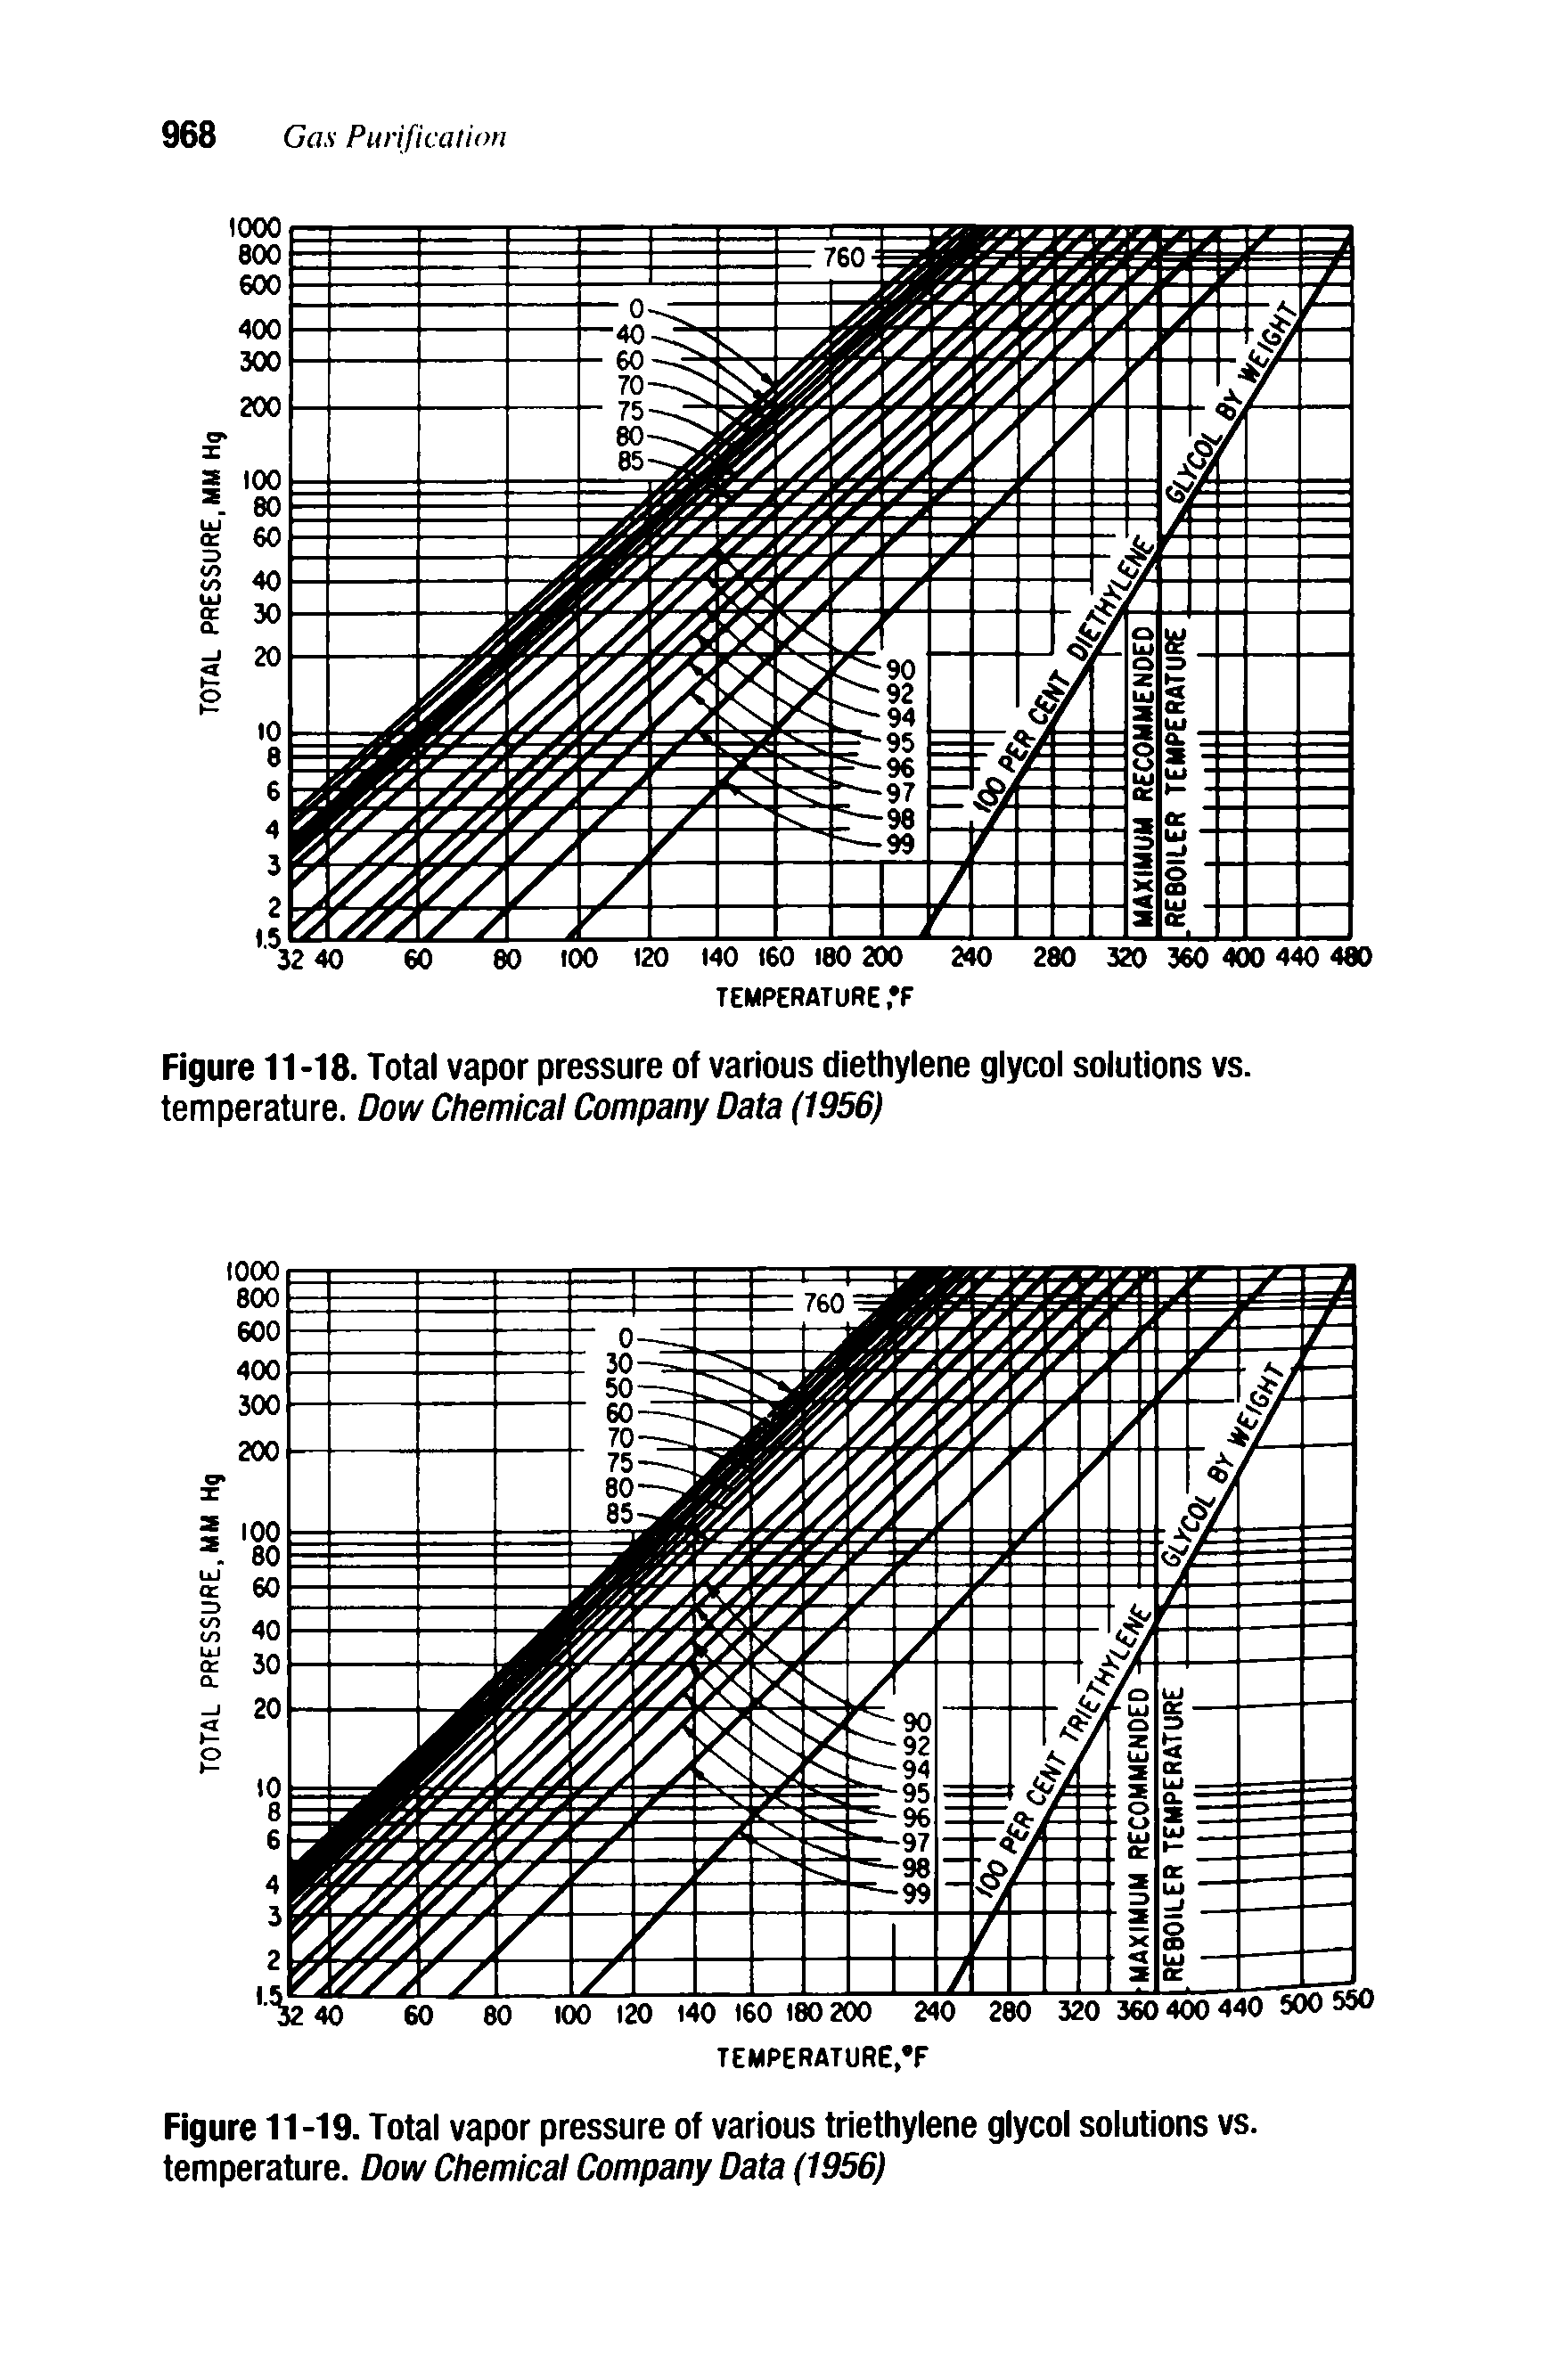 Figure 11-18. Total vapor pressure of various diethylene glycol solutions vs. temperature. Dow Chemical Company Data (1956)...